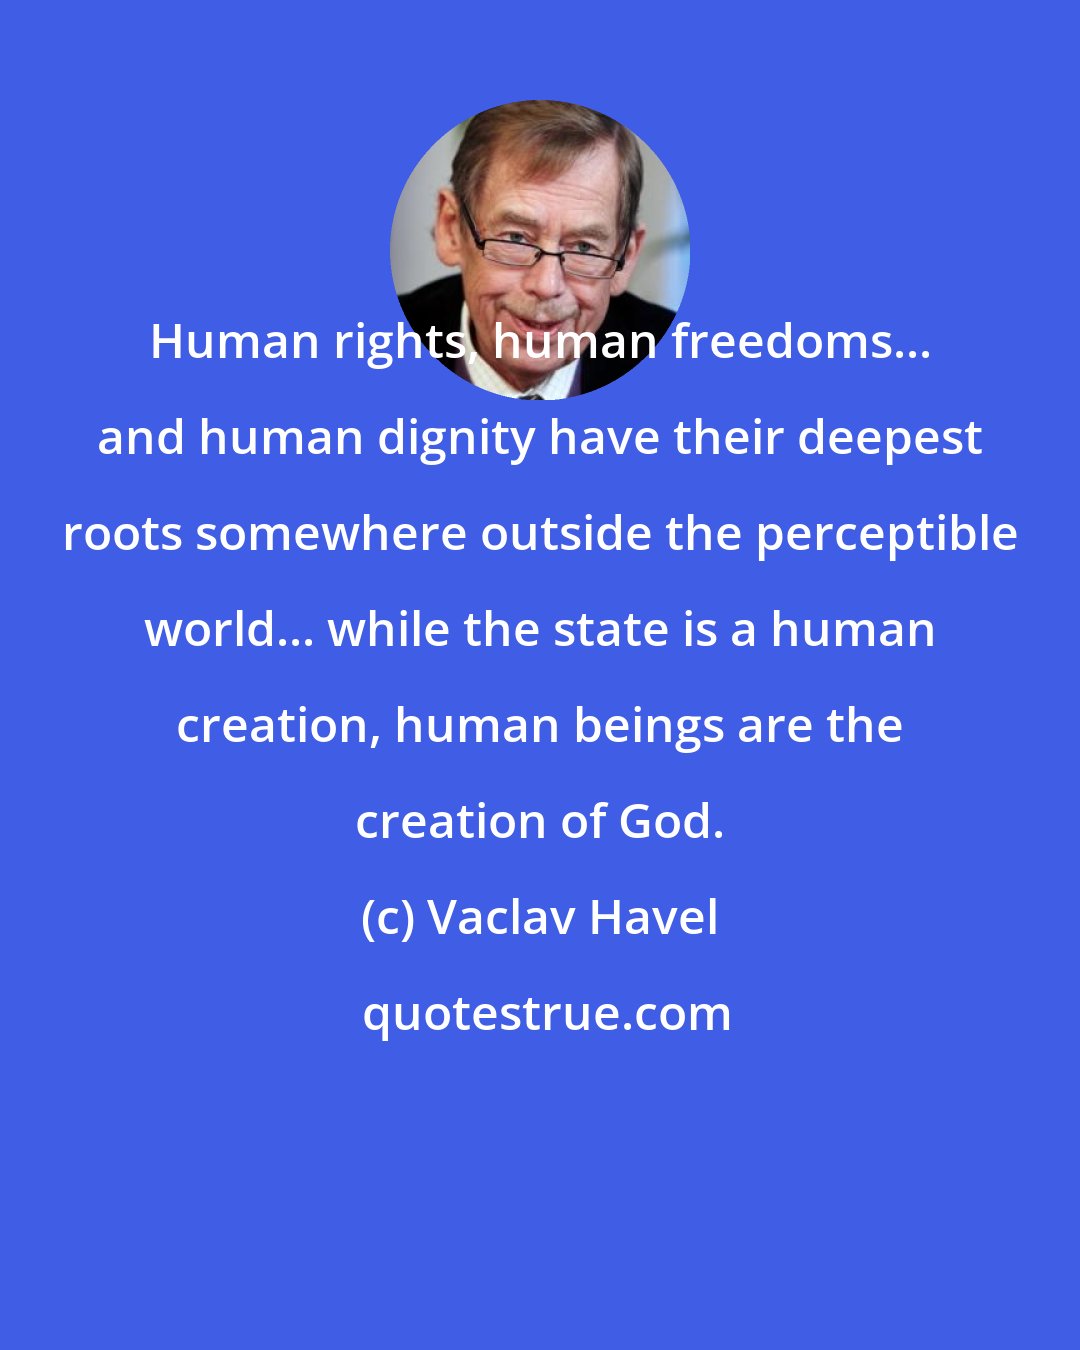 Vaclav Havel: Human rights, human freedoms... and human dignity have their deepest roots somewhere outside the perceptible world... while the state is a human creation, human beings are the creation of God.